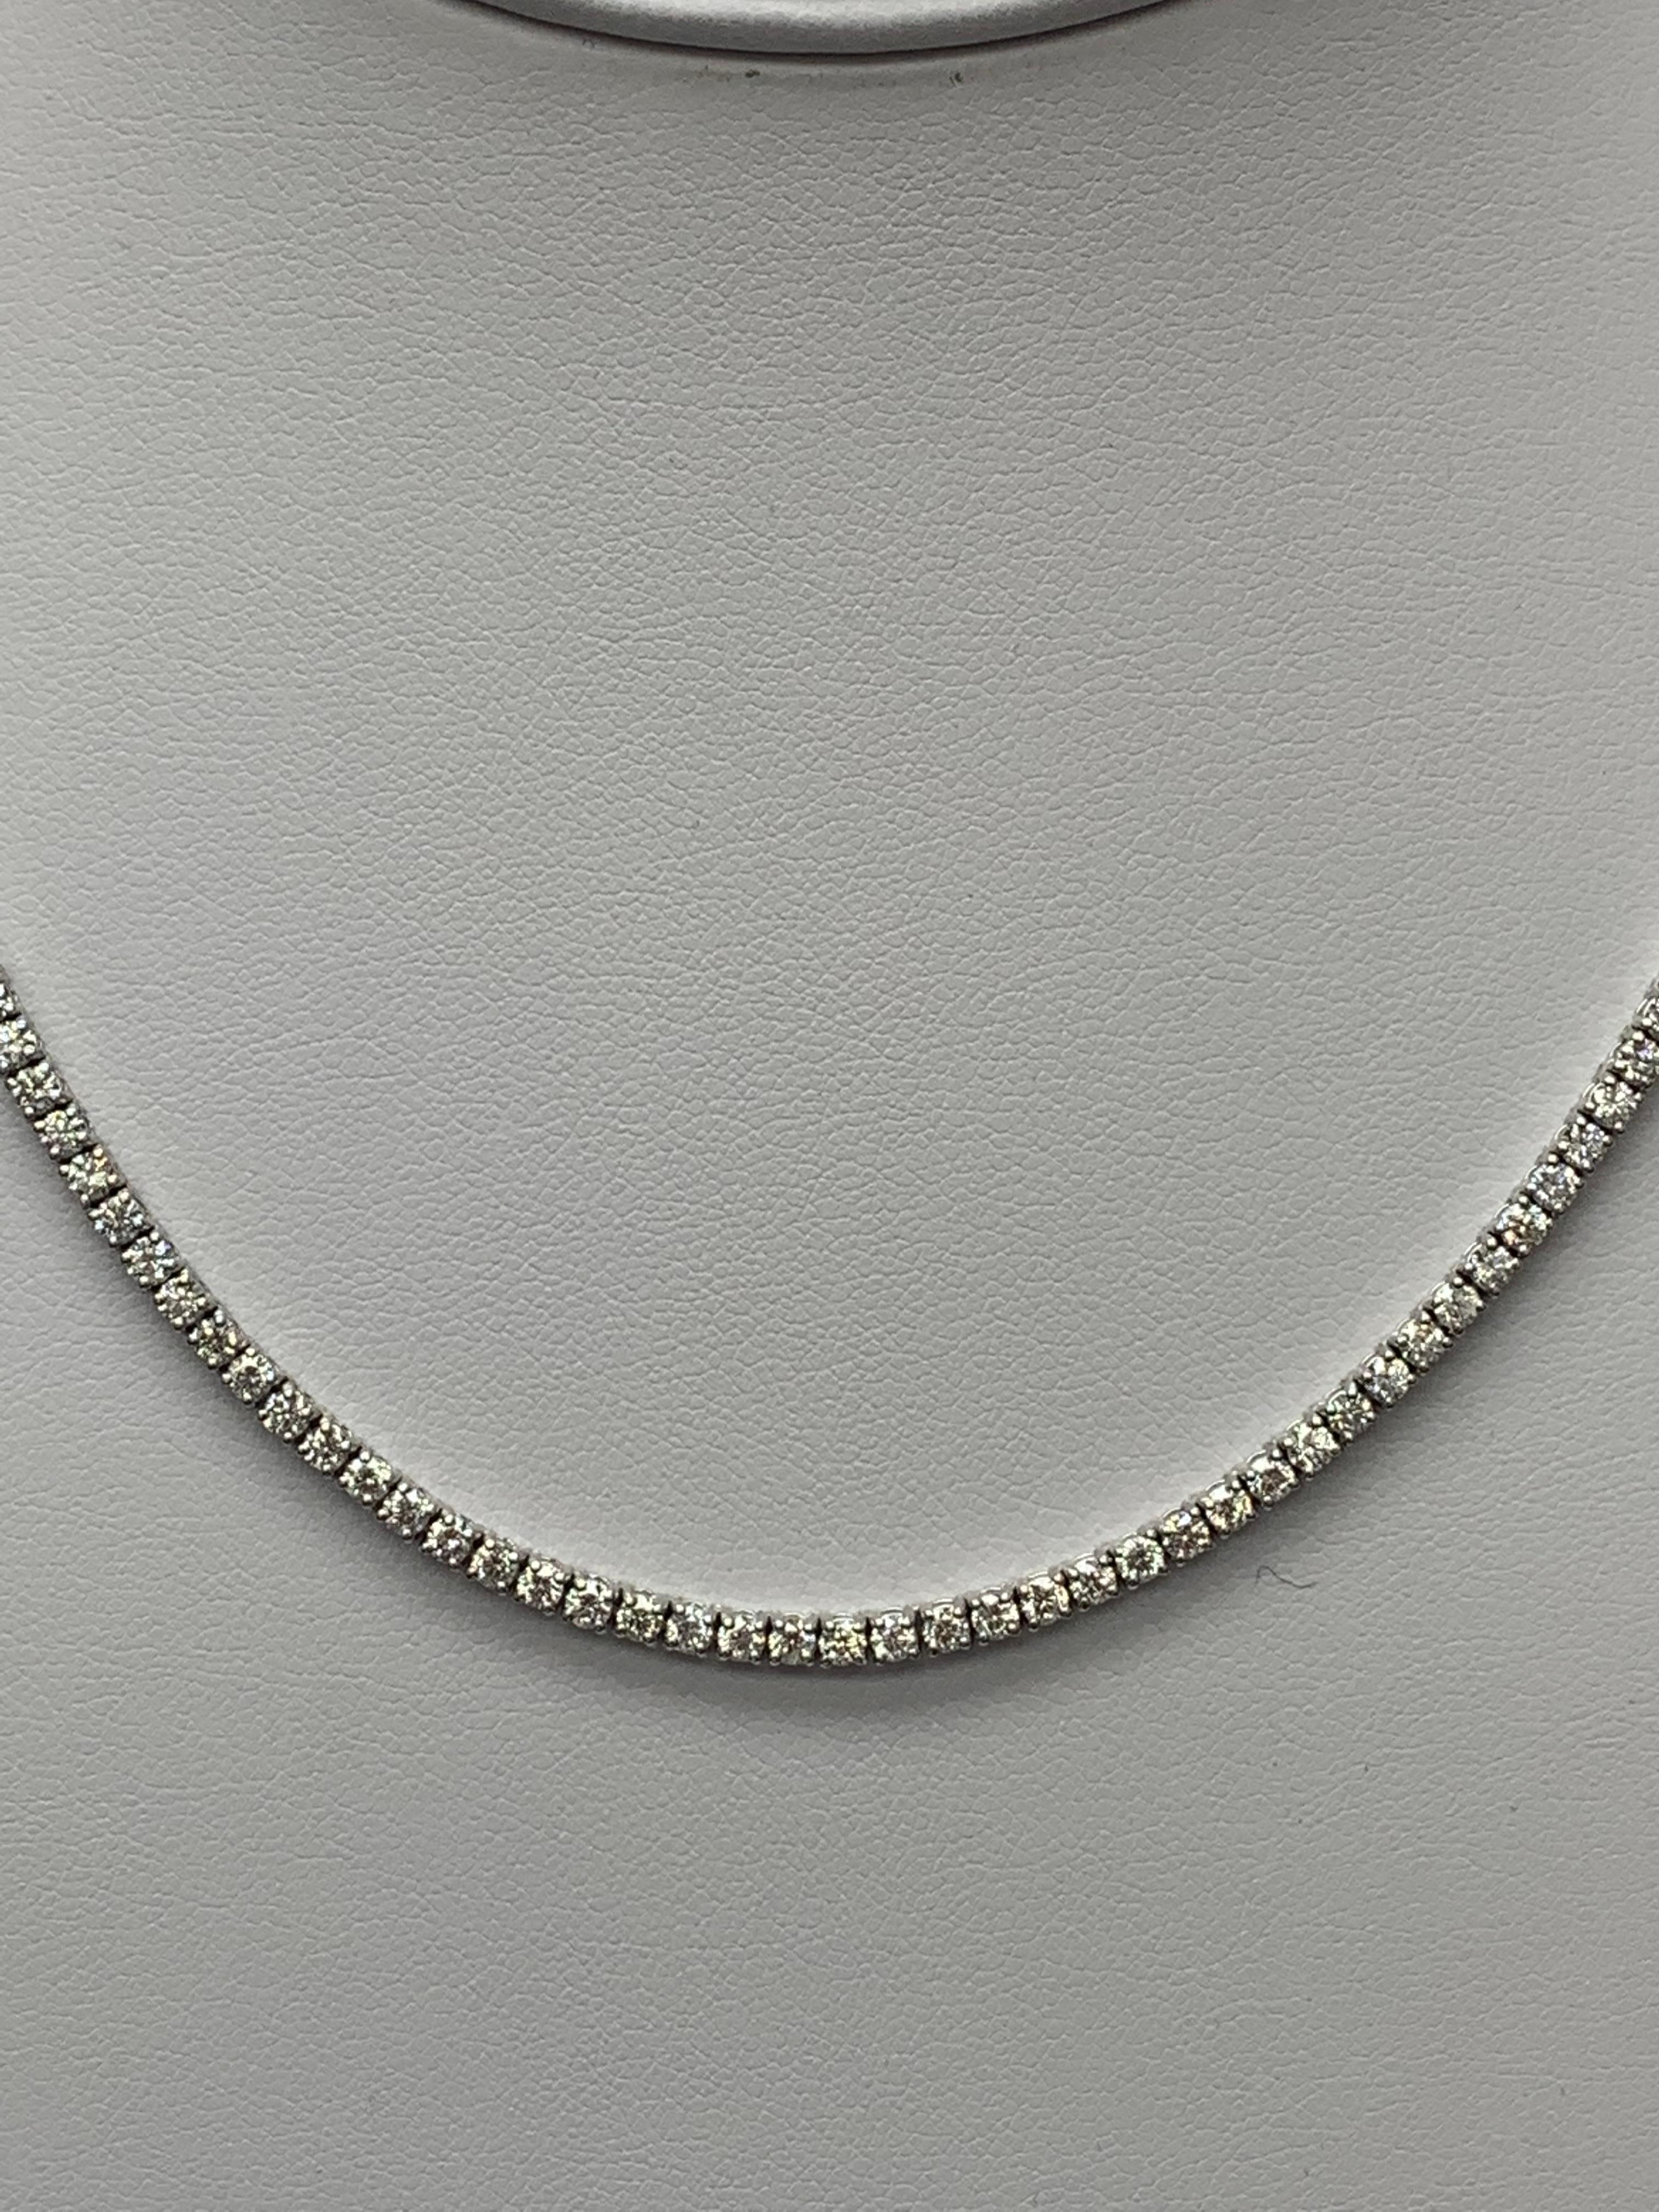 A brilliant and classic piece showcasing a line of round diamonds set in 14K White Gold. 168 diamonds in this necklace are brilliant round cut and weigh 8.01 carats in total. 16 inches in length.